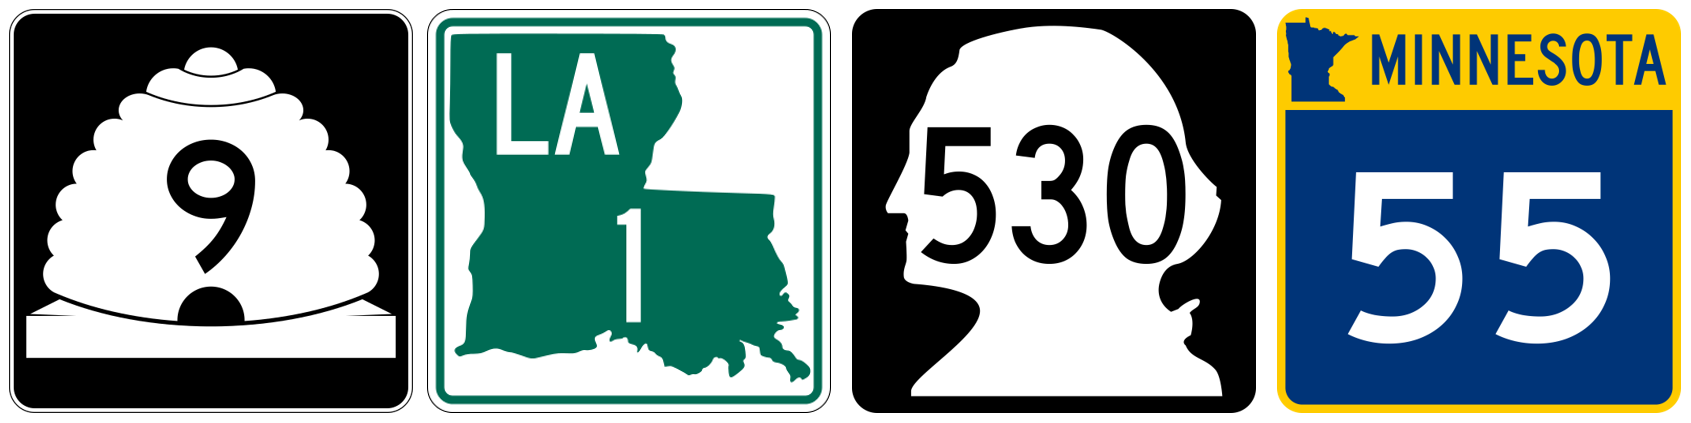 US State Highway marker shields, easily identifiable with large numbers, see caption and text above